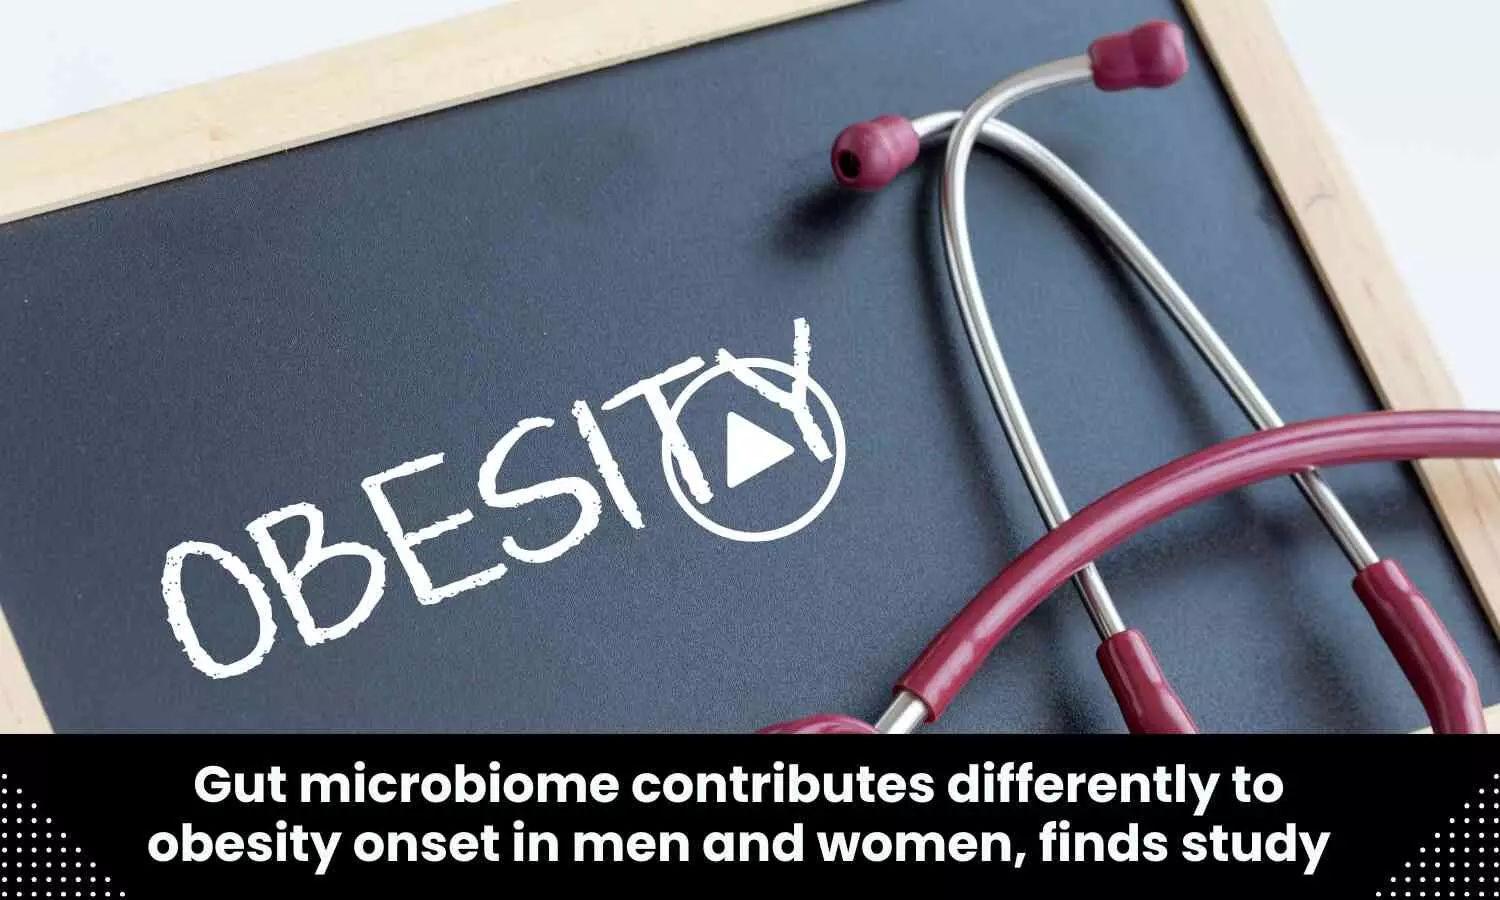 Gut microbiome contributes differently to obesity onset in men and women, finds study